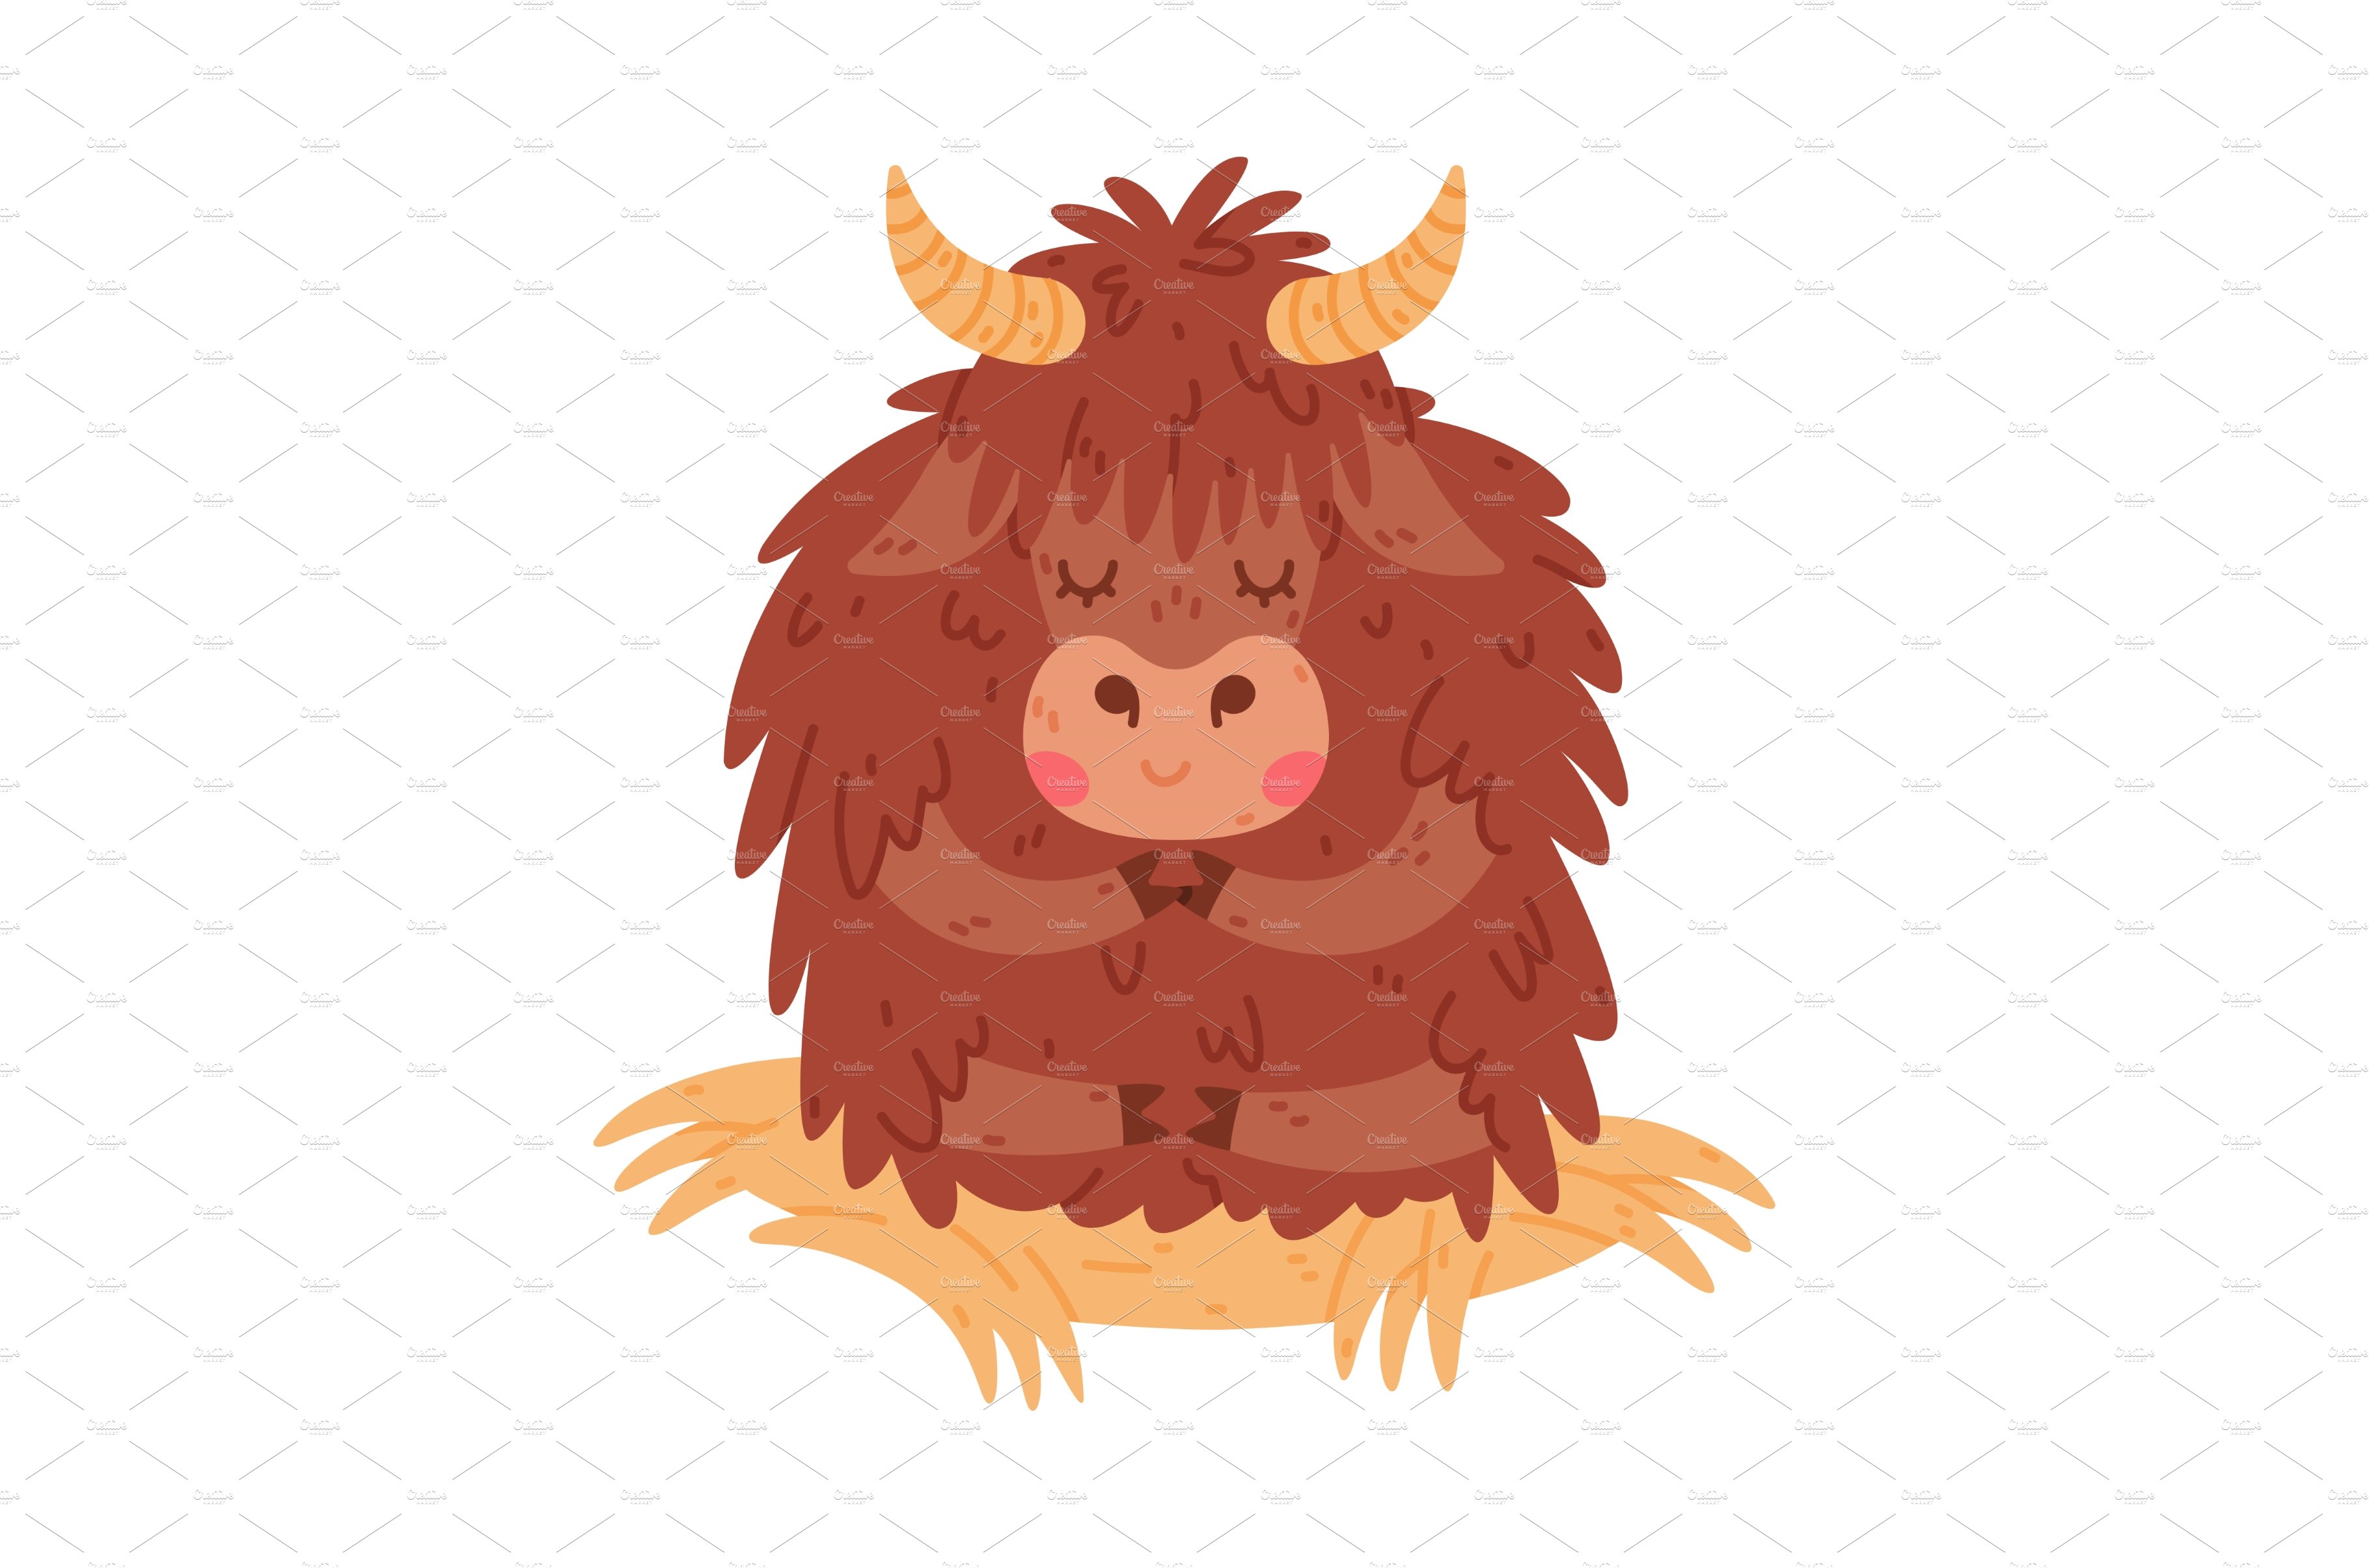 Cute Yak Character with Dense Fur cover image.